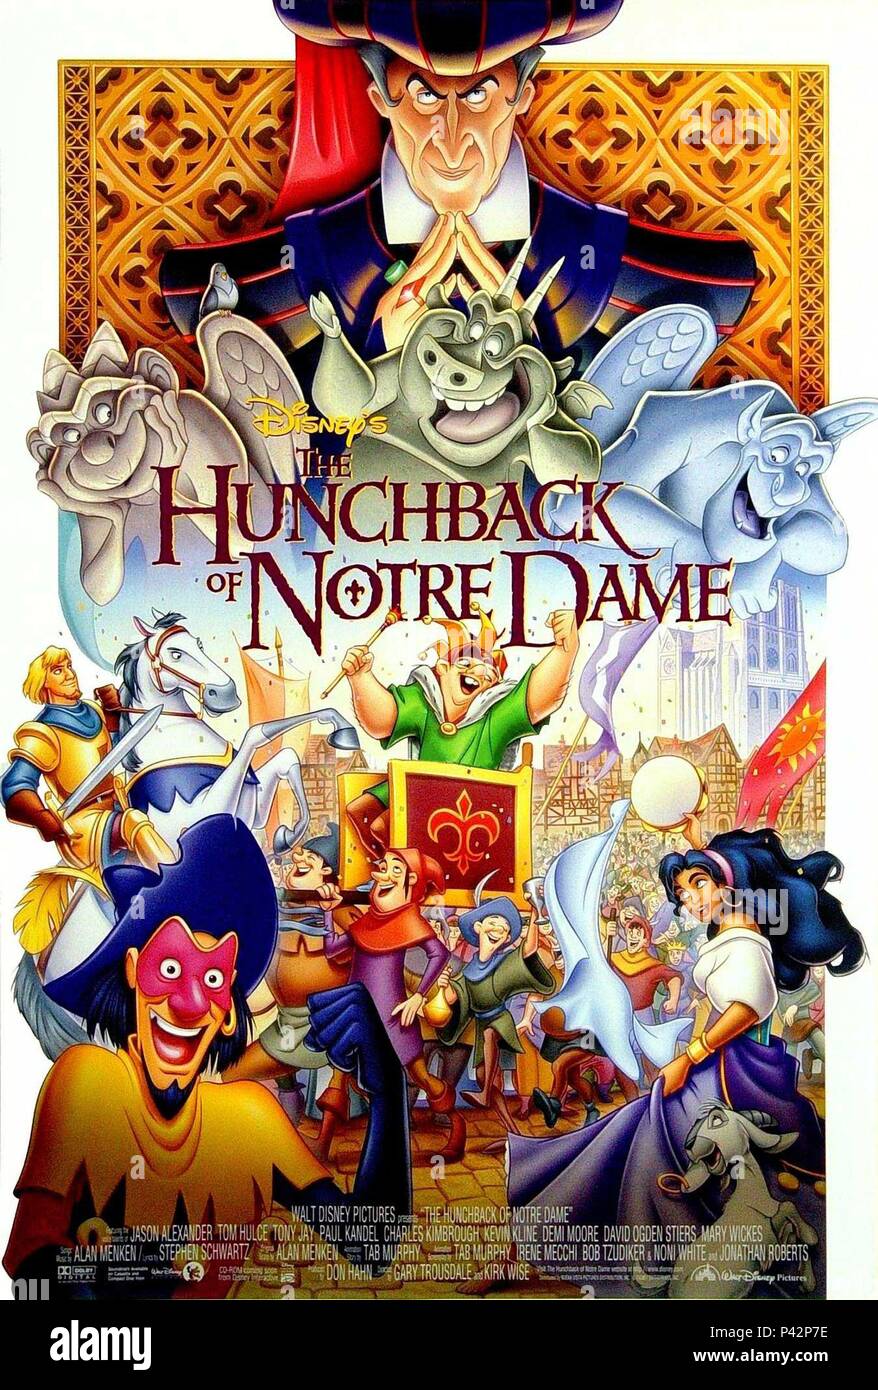 Original Film Title: THE HUNCHBACK OF NOTRE DAME. English Title: THE